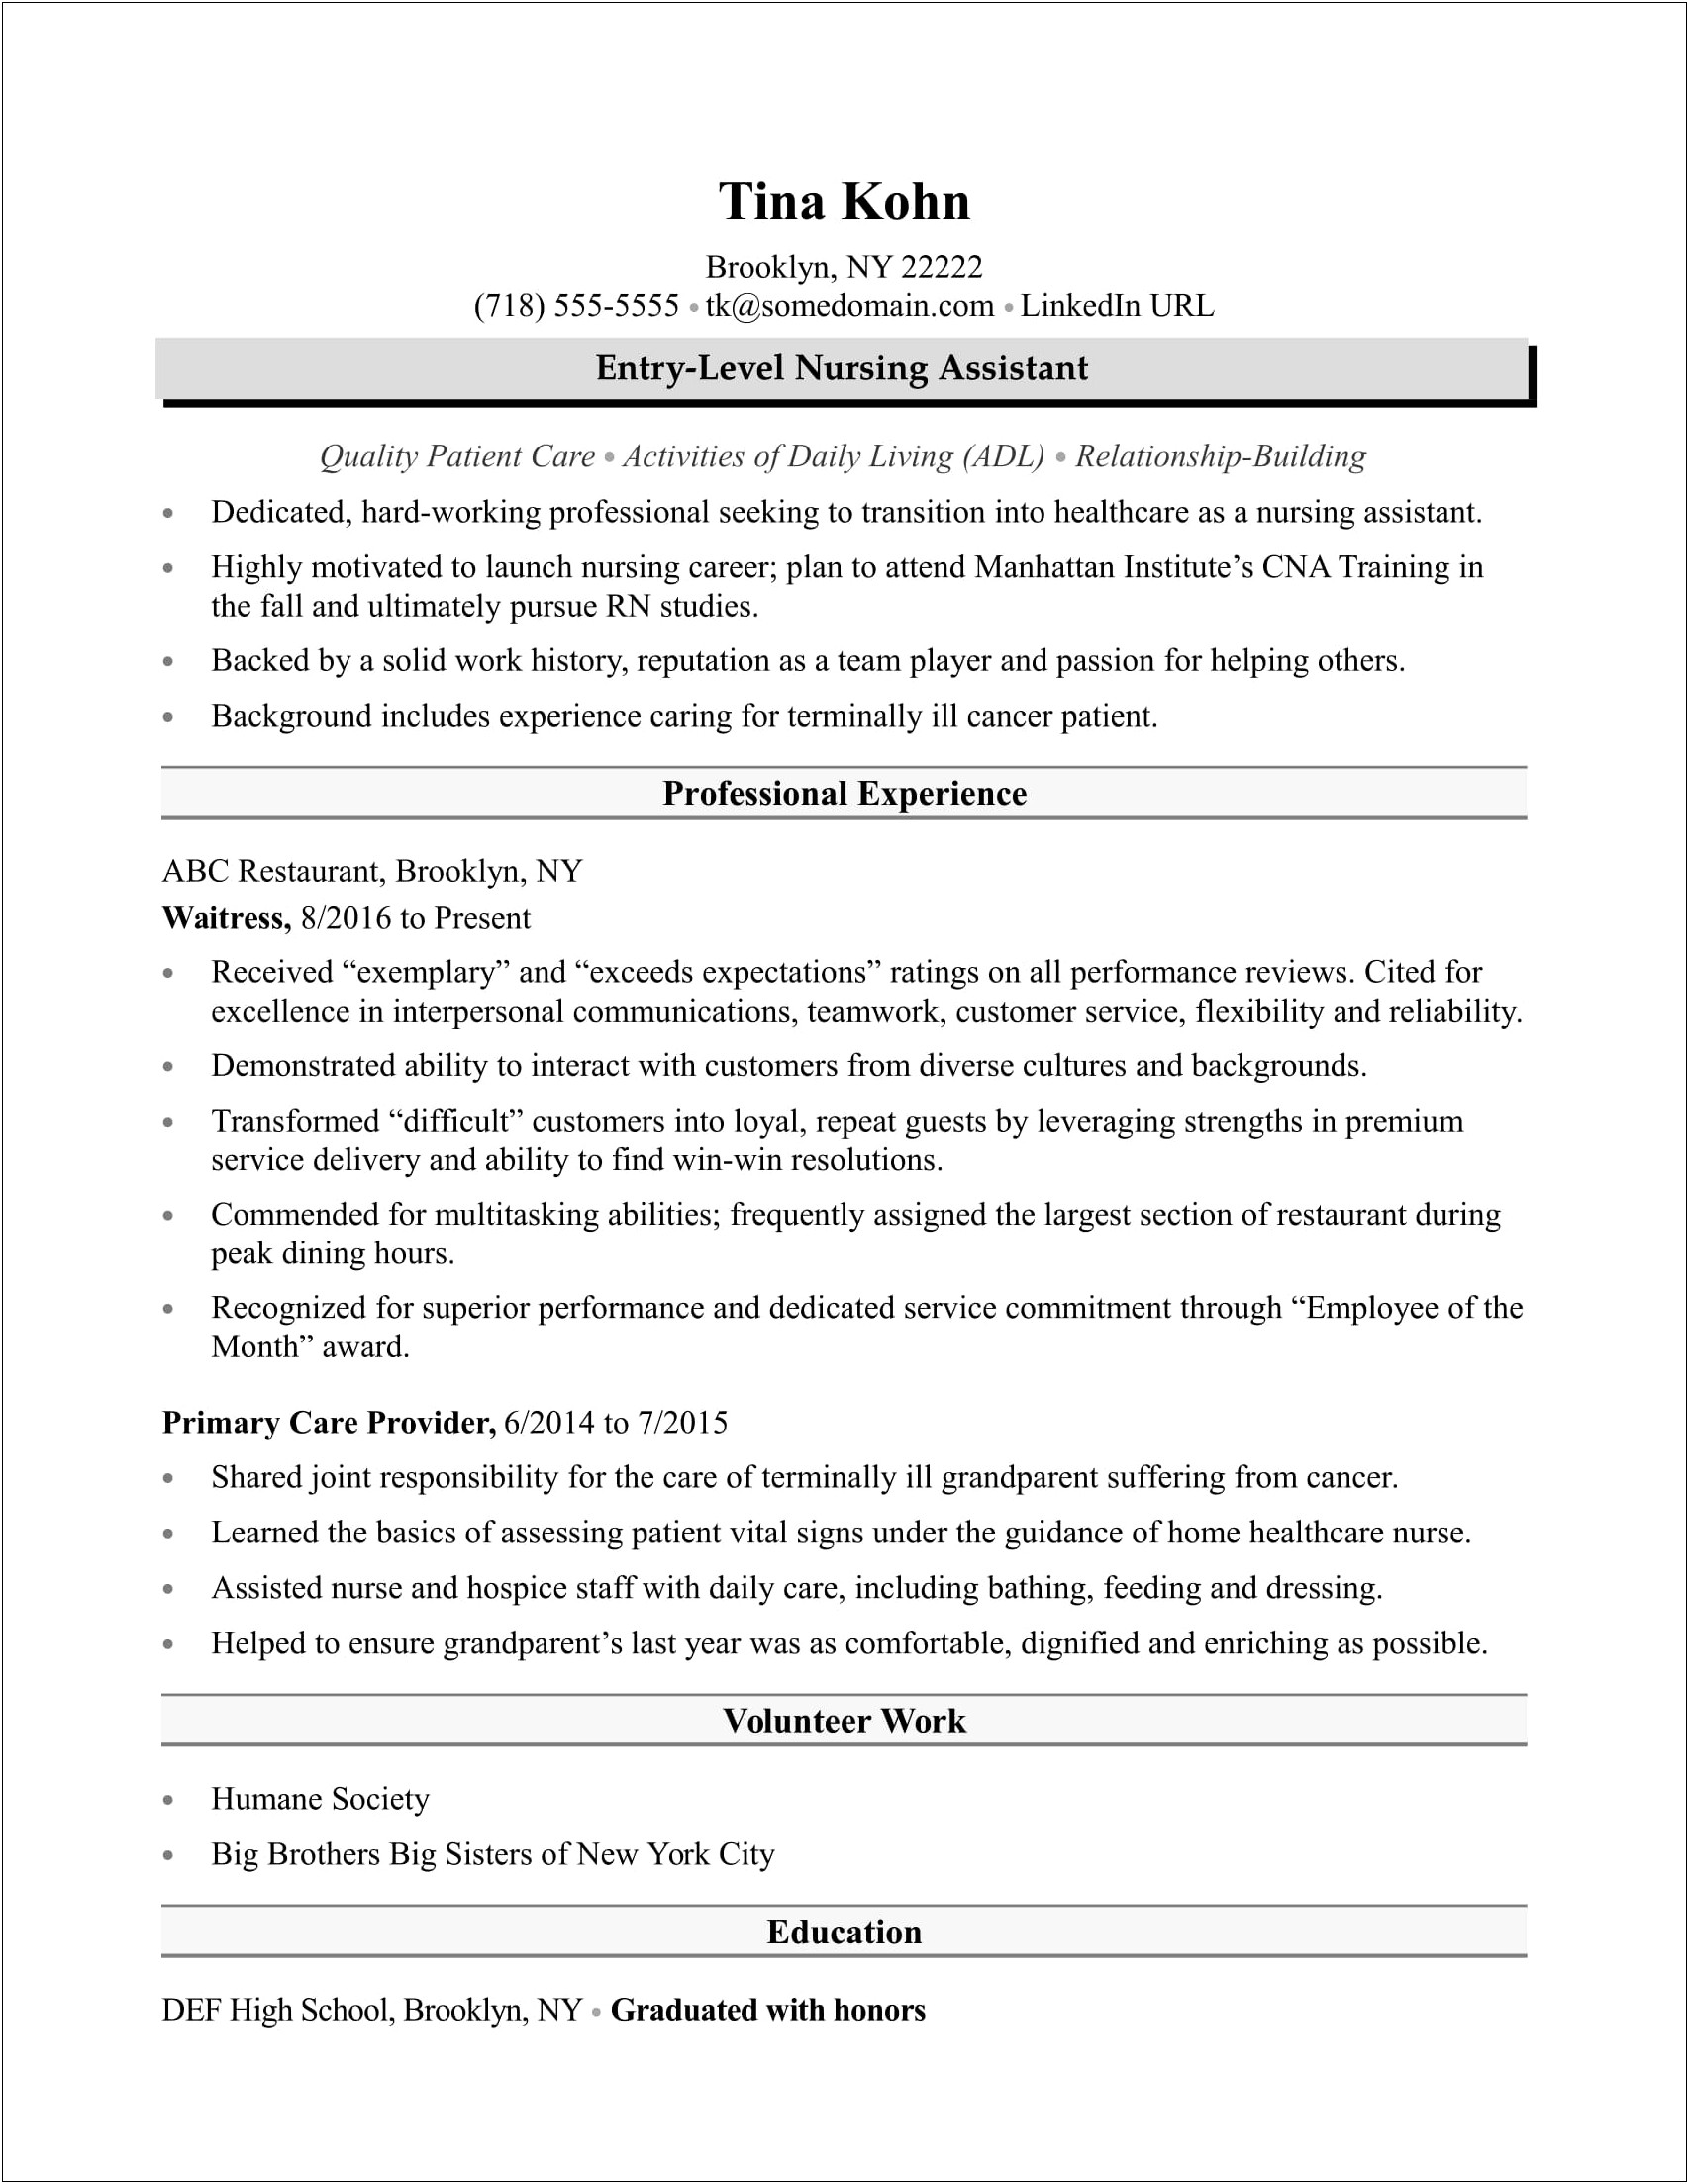 Cna Skills And Qualifications For Resume